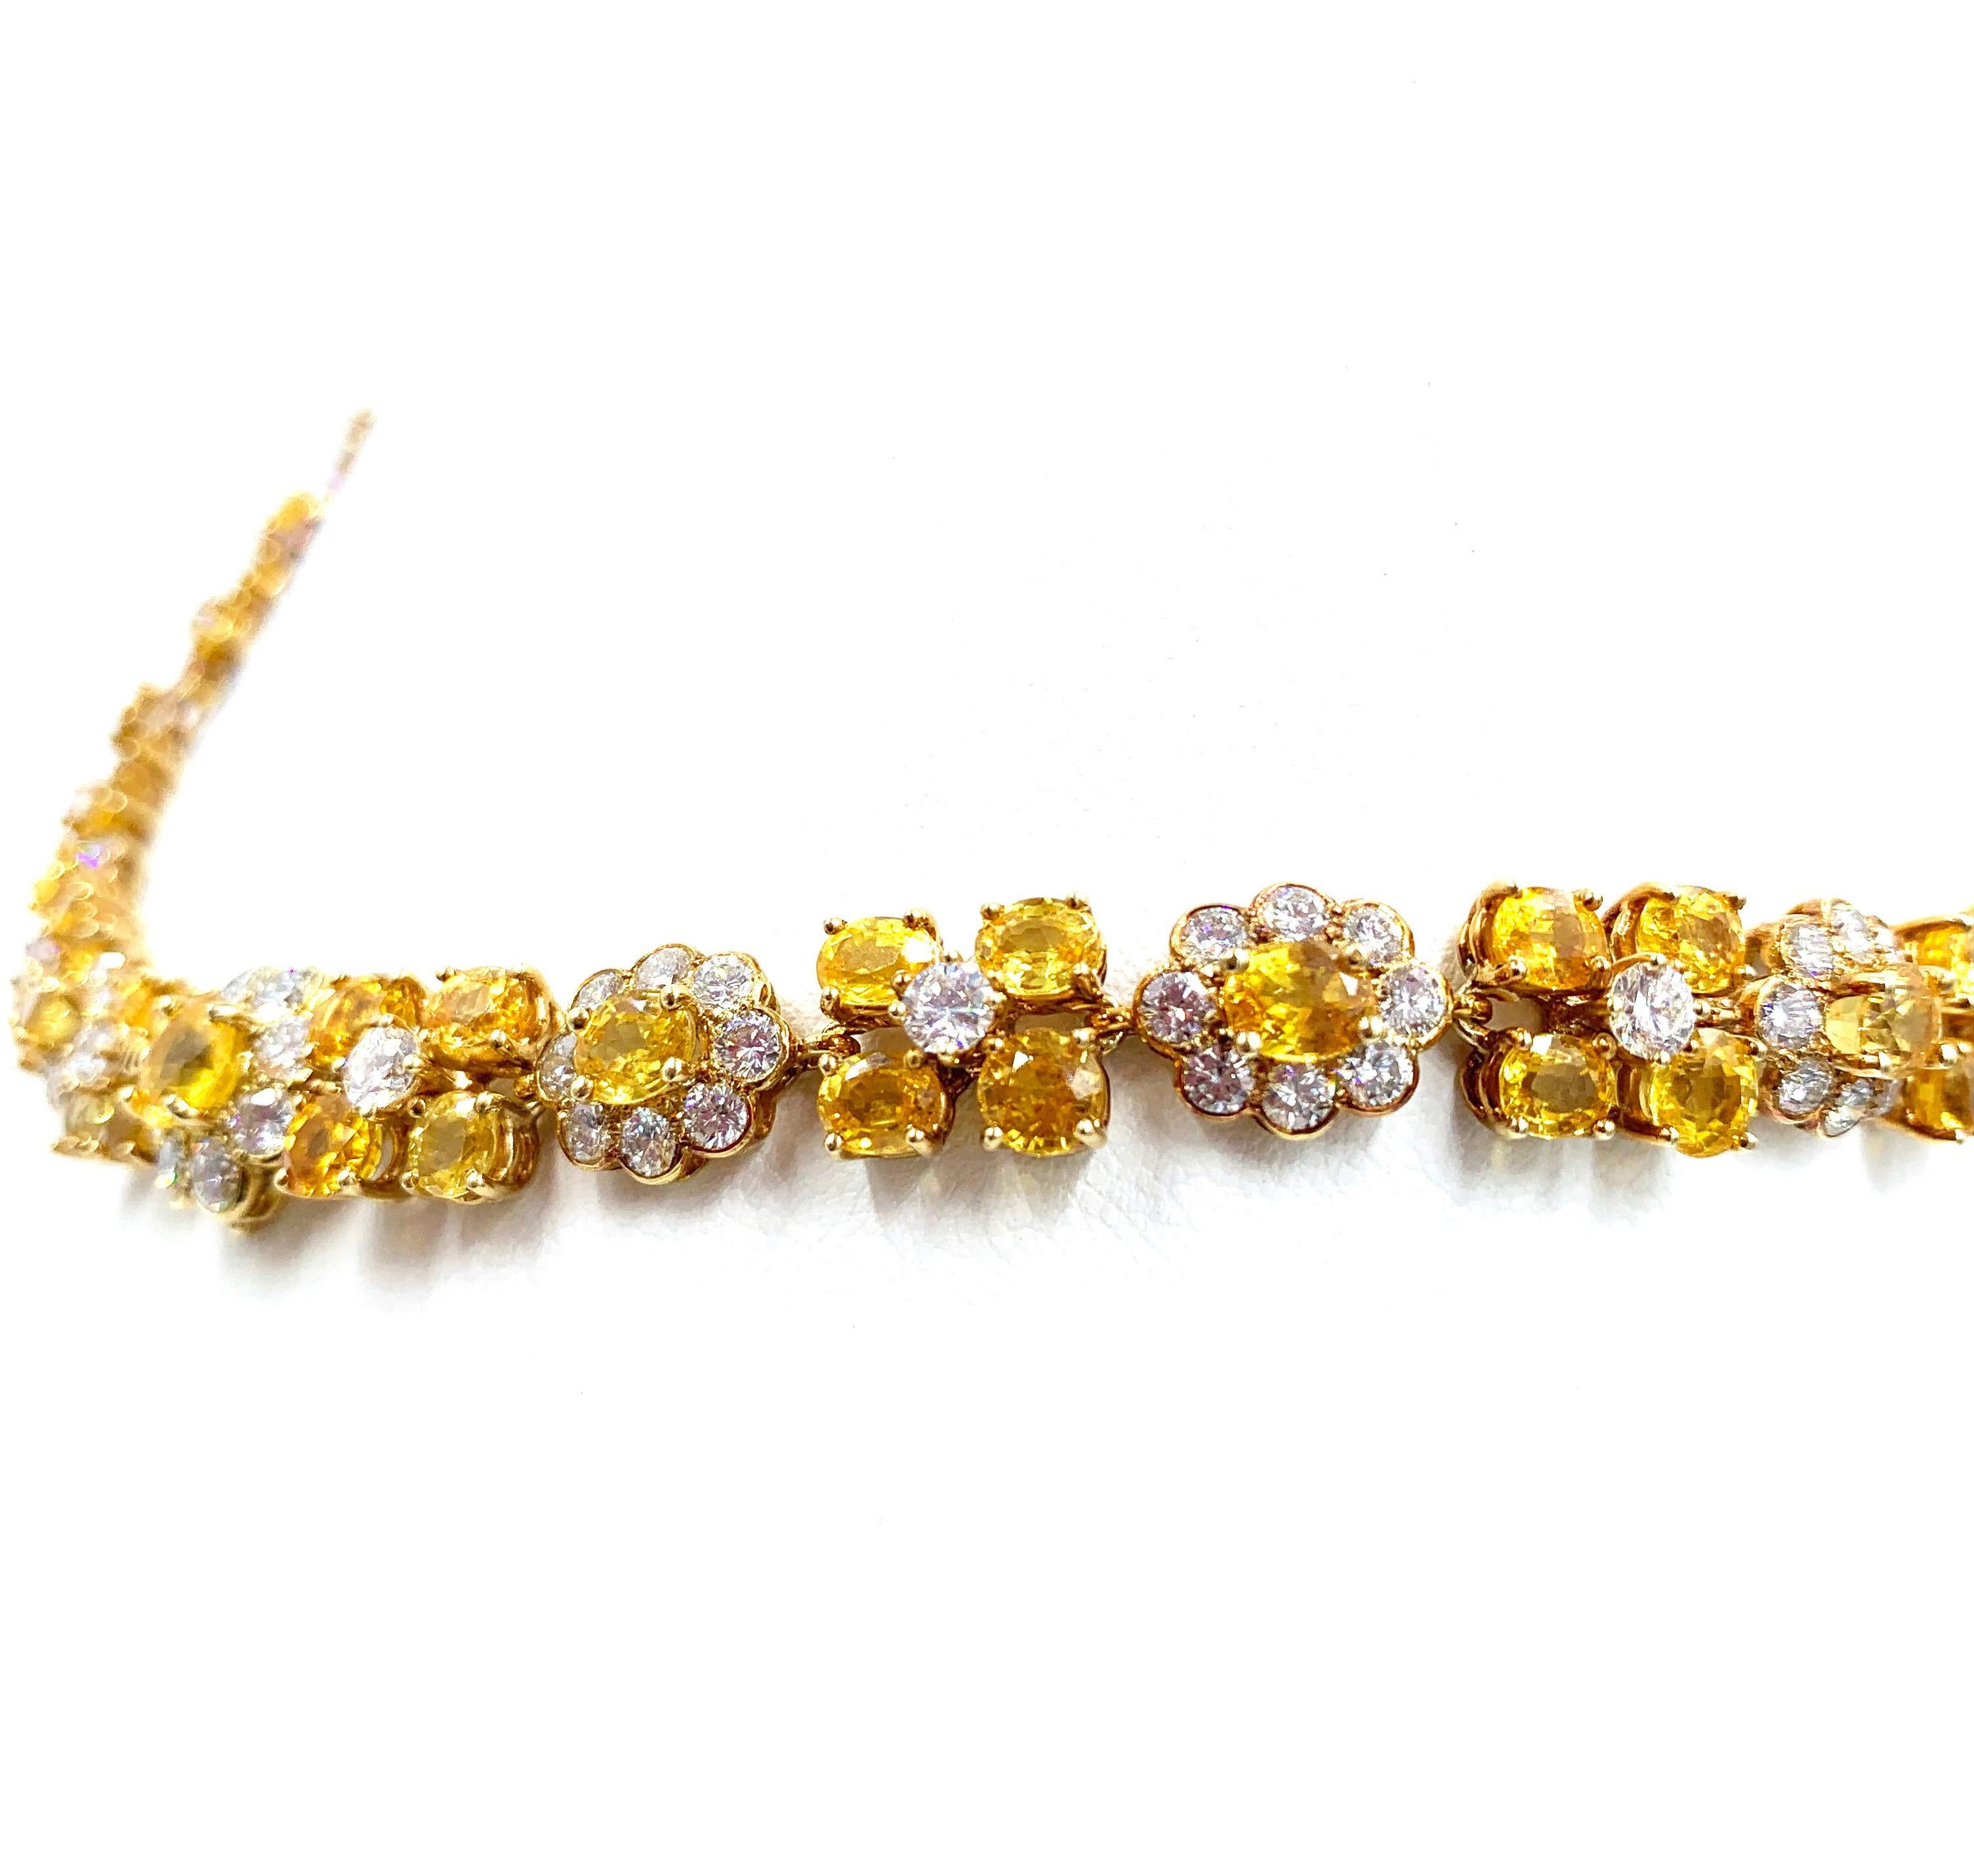 Round Cut Van Cleef & Arpels Natural Yellow Ceylon Sapphire and Diamond Necklace For Sale